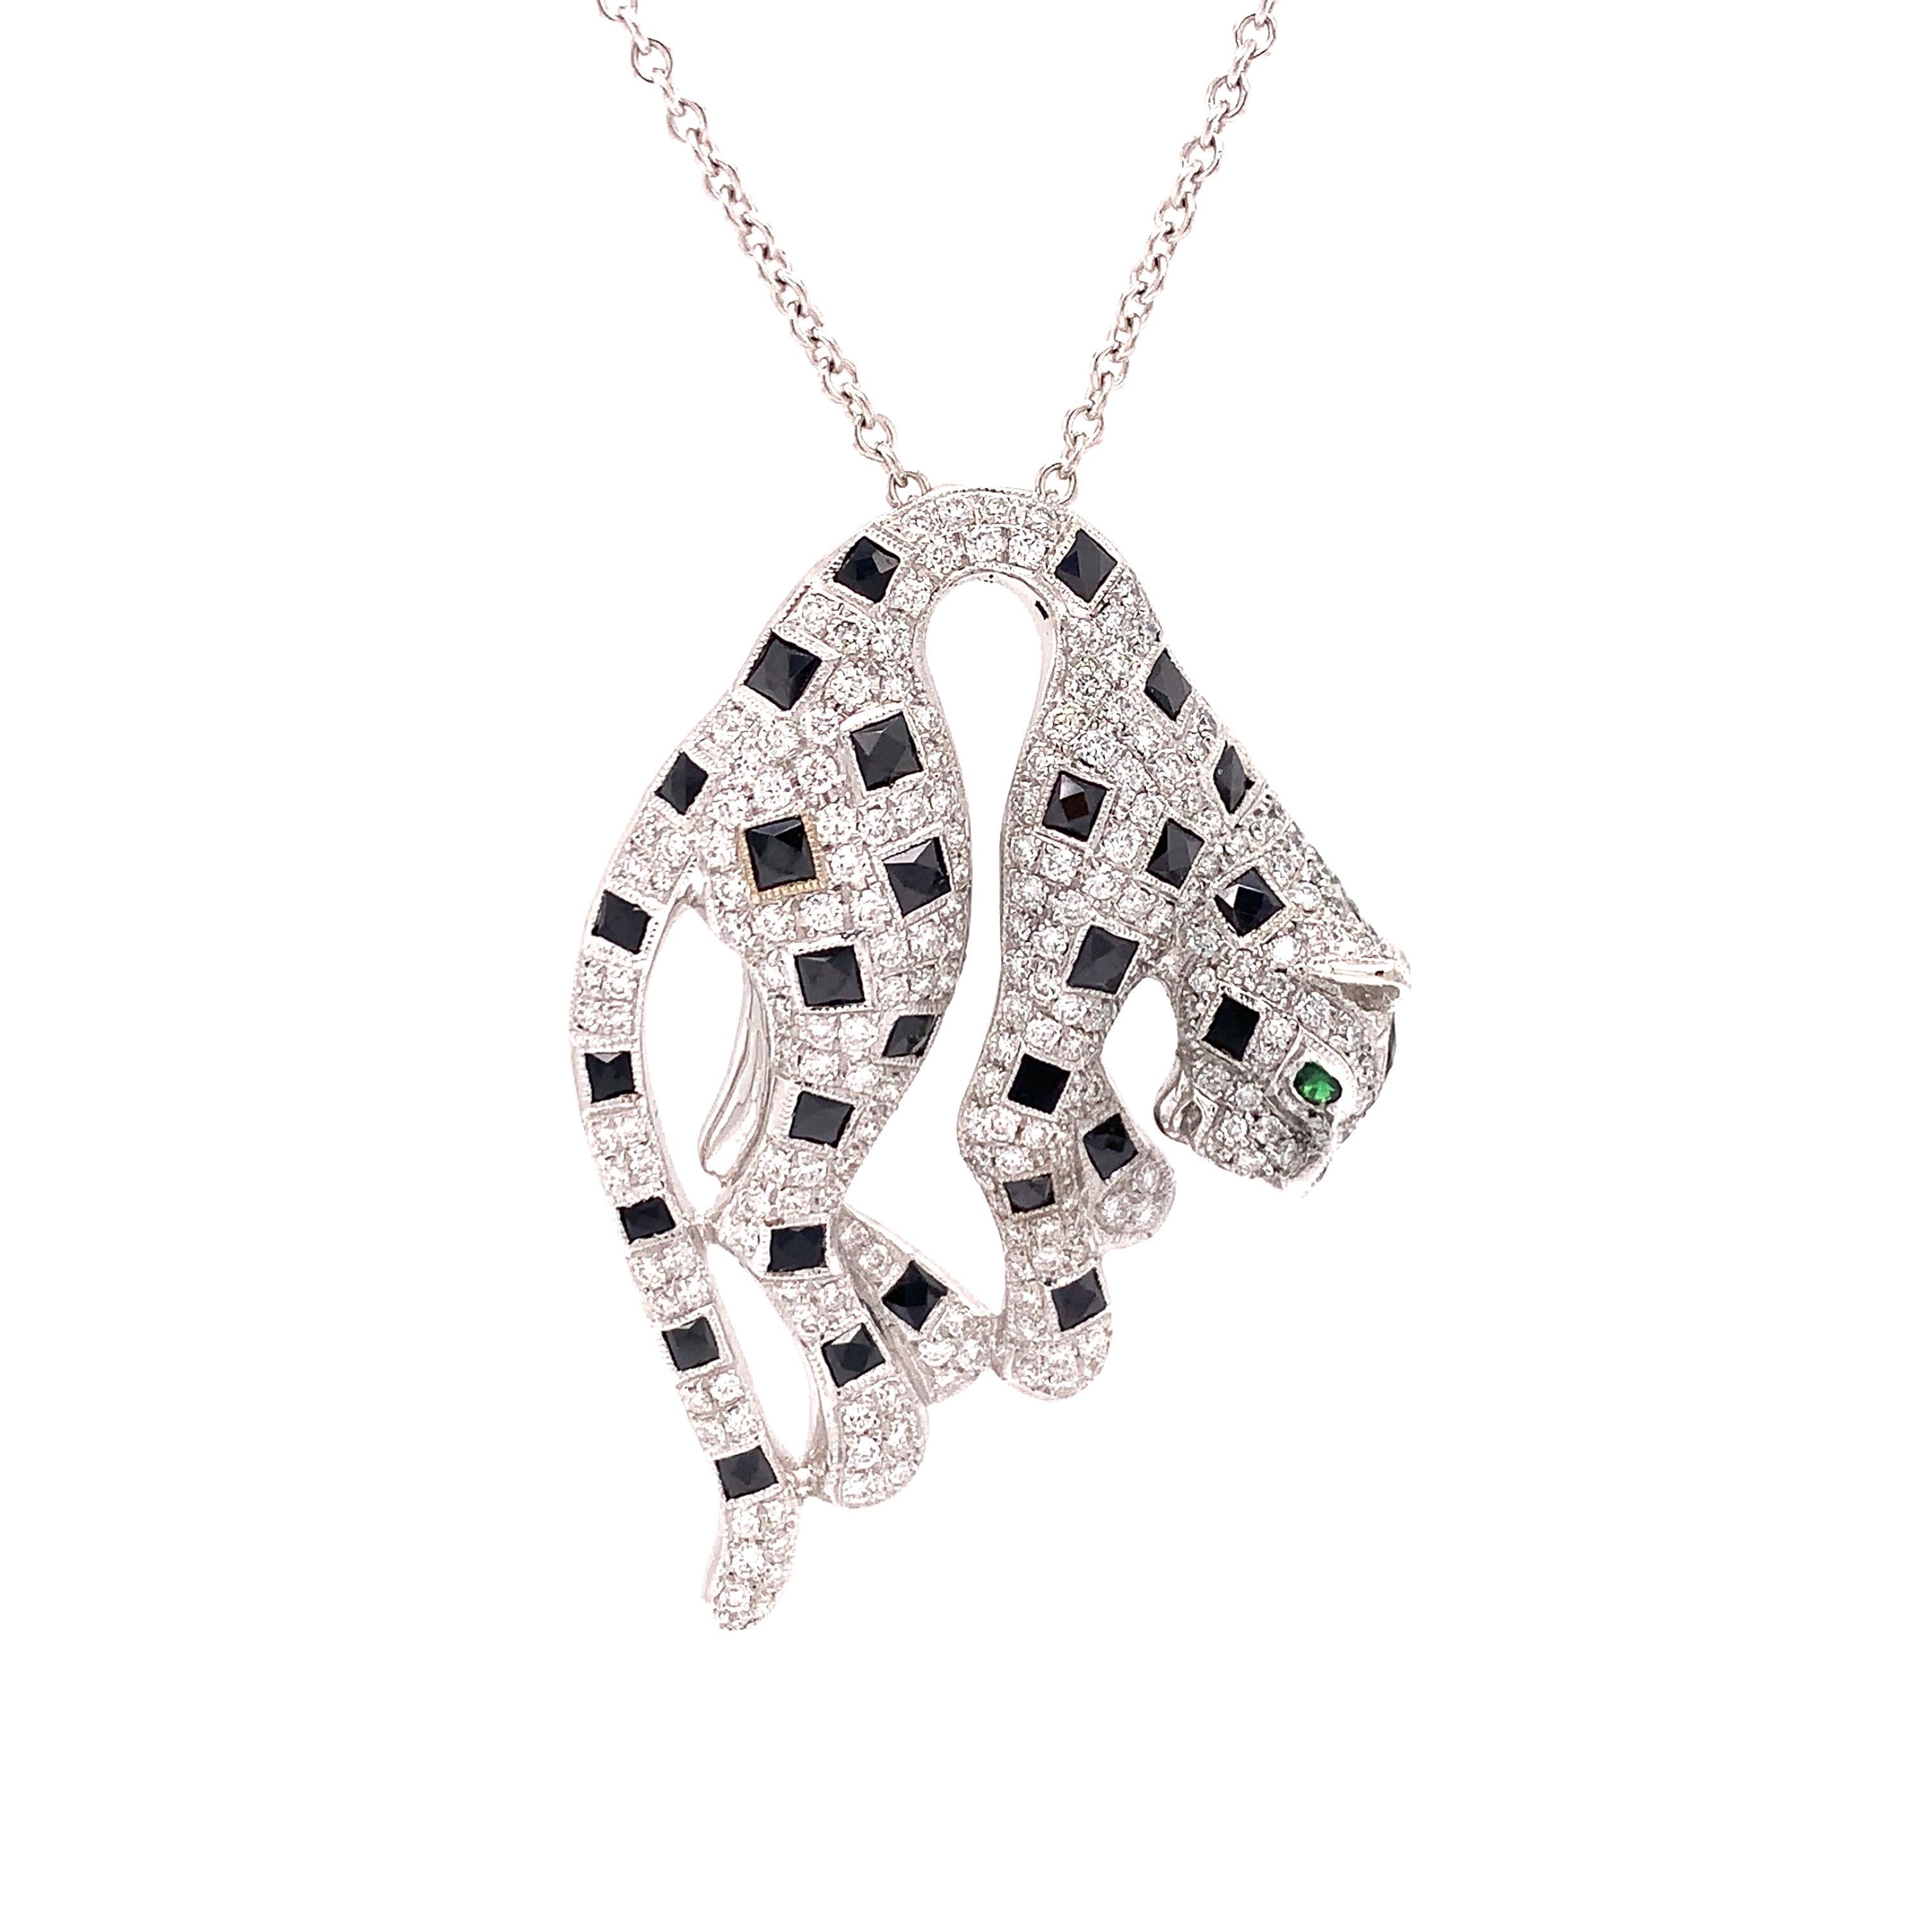 Be ready for compliments while wearing this iconic panther design. With 2.00 cttw of G-H color and VS1-SI1 clarity diamonds, this classic necklace will catch the eye.  Accented with .78 cttw of custom cut onyx and a .05 ct tsavorite for the panthers